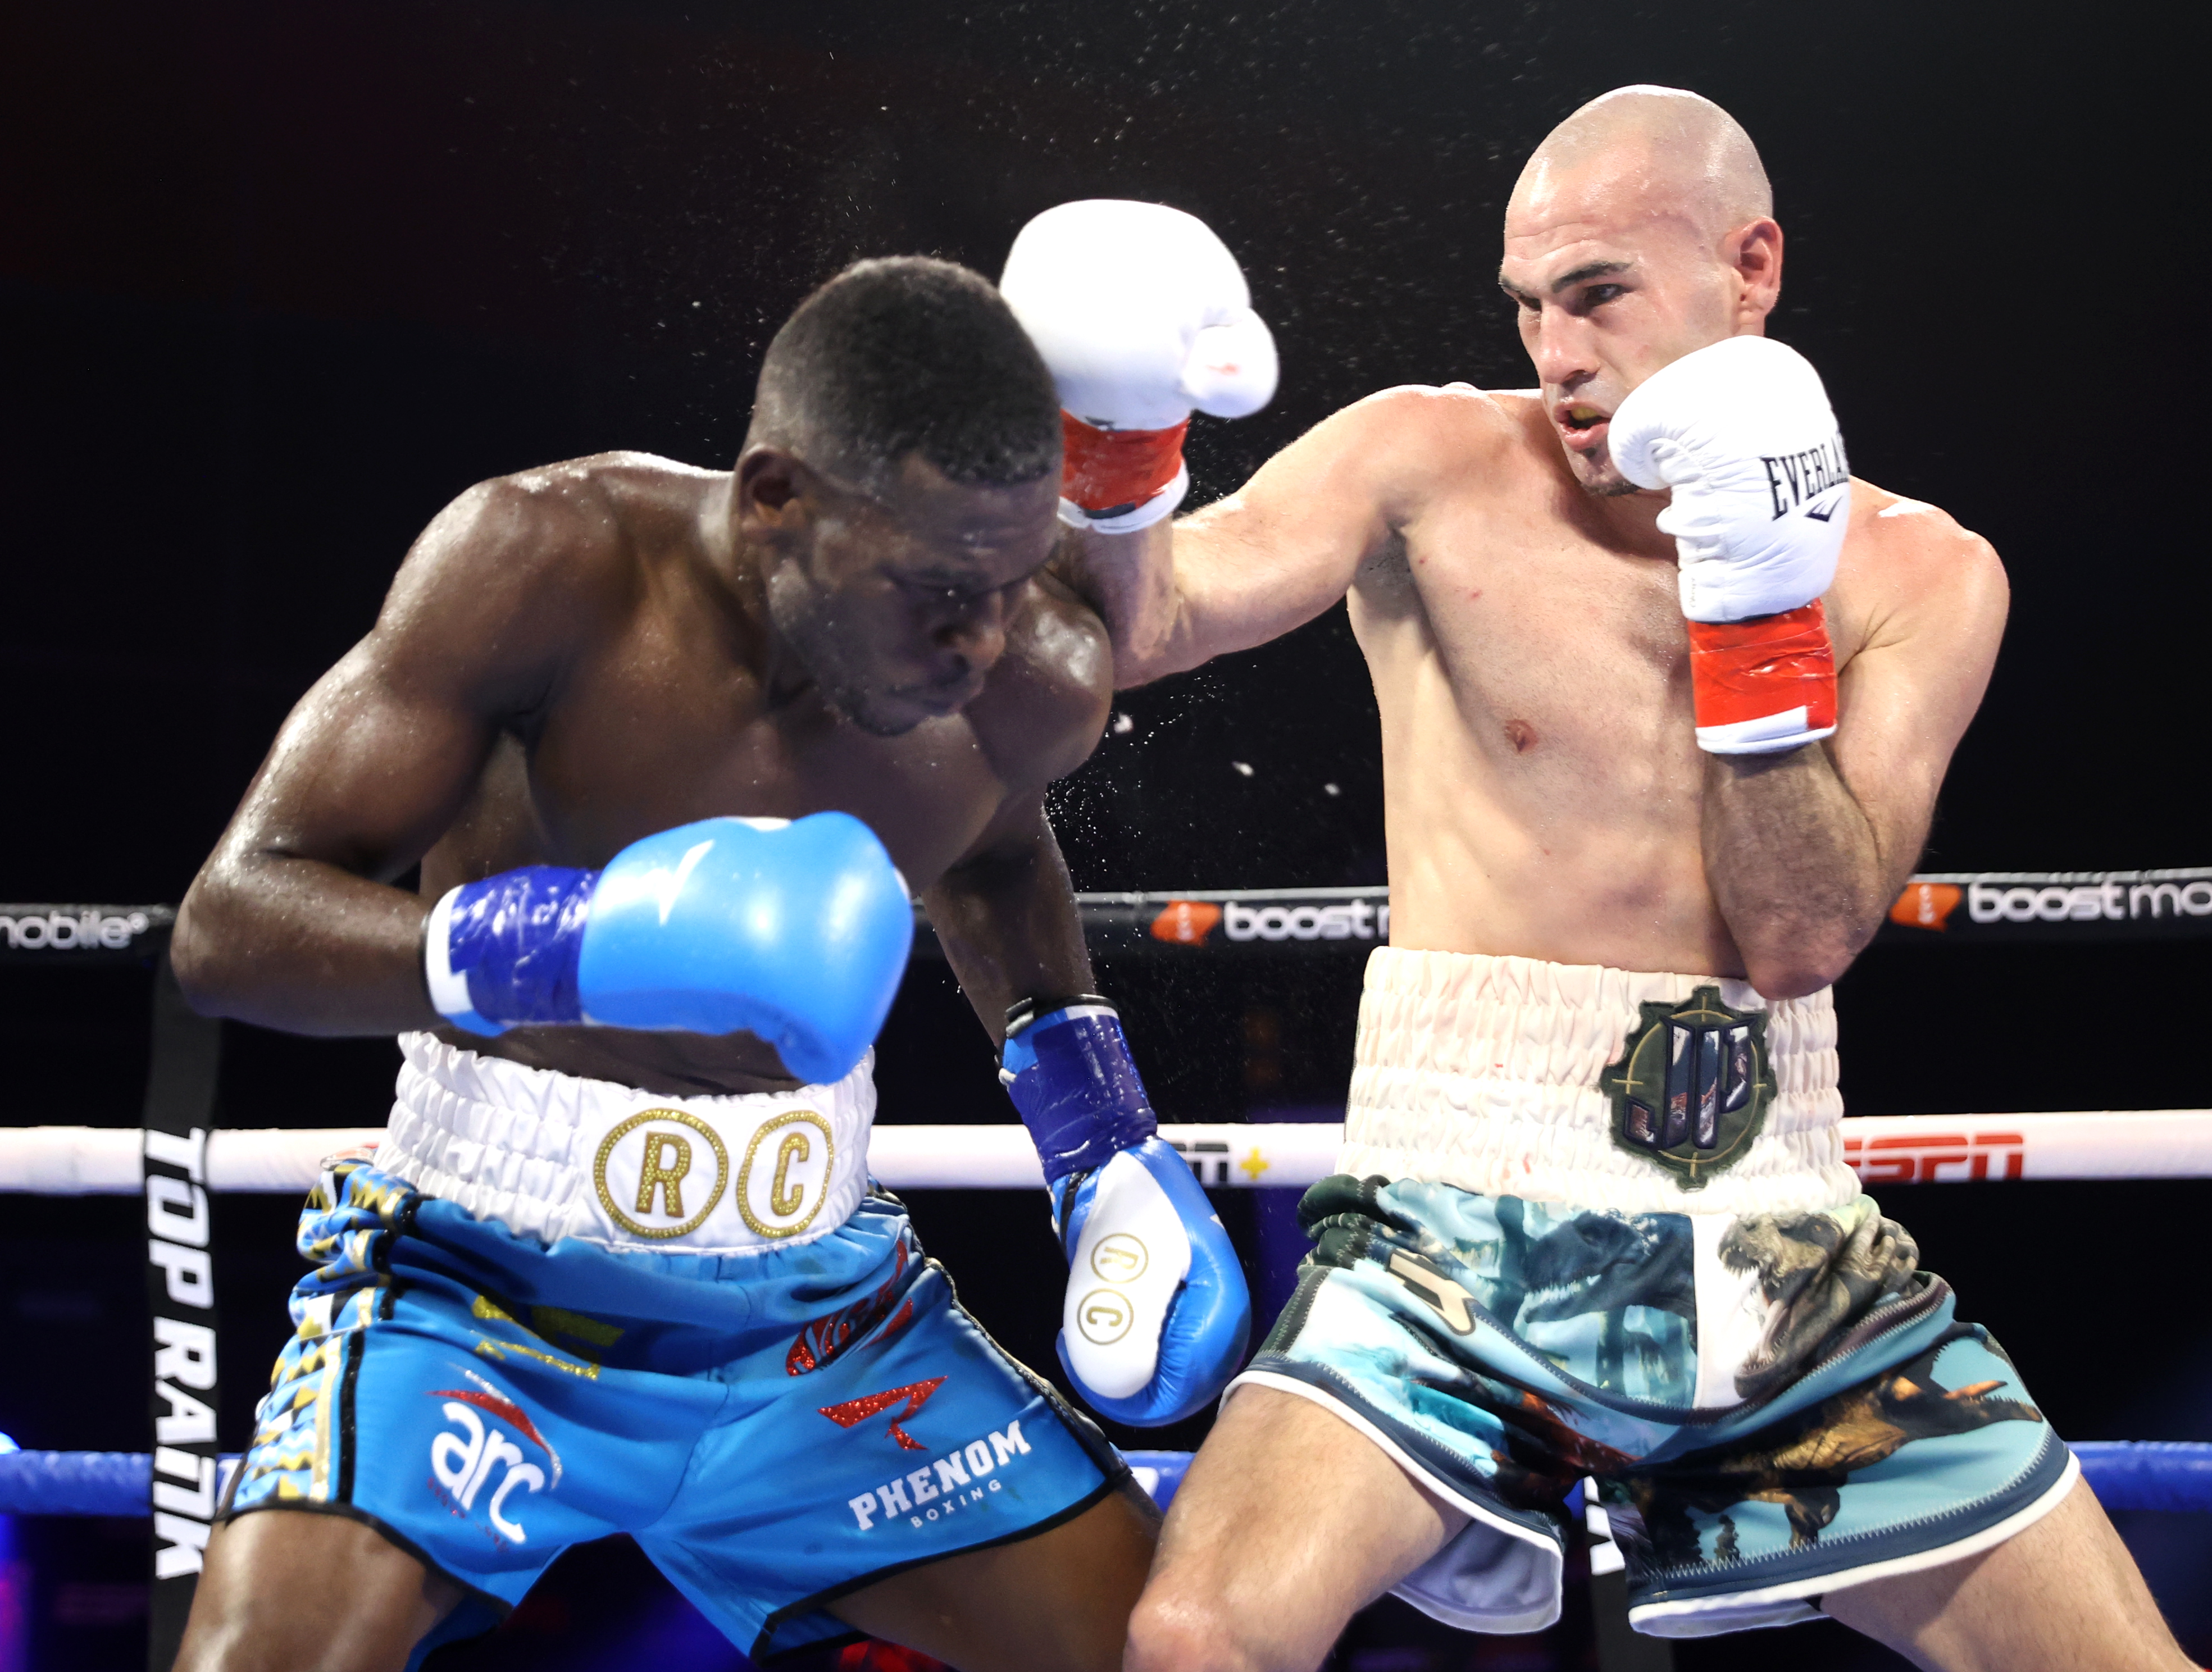 Judges couldn’t find a winner in Pedraza vs Commey